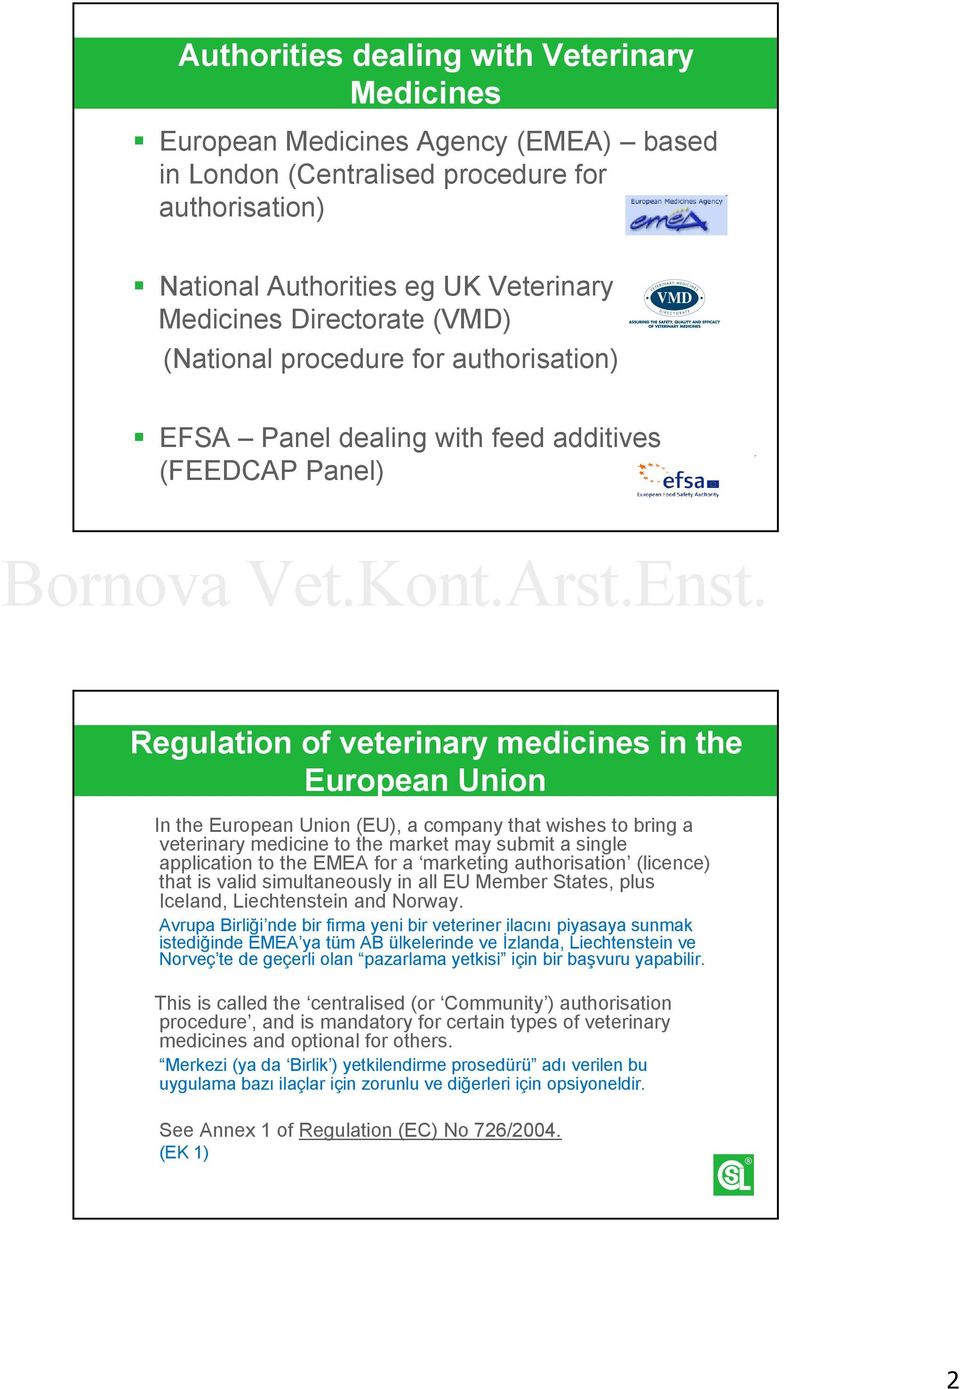 wishes to bring a veterinary medicine to the market may submit a single application to the EMEA for a marketing authorisation (licence) that is valid simultaneously in all EU Member States, plus